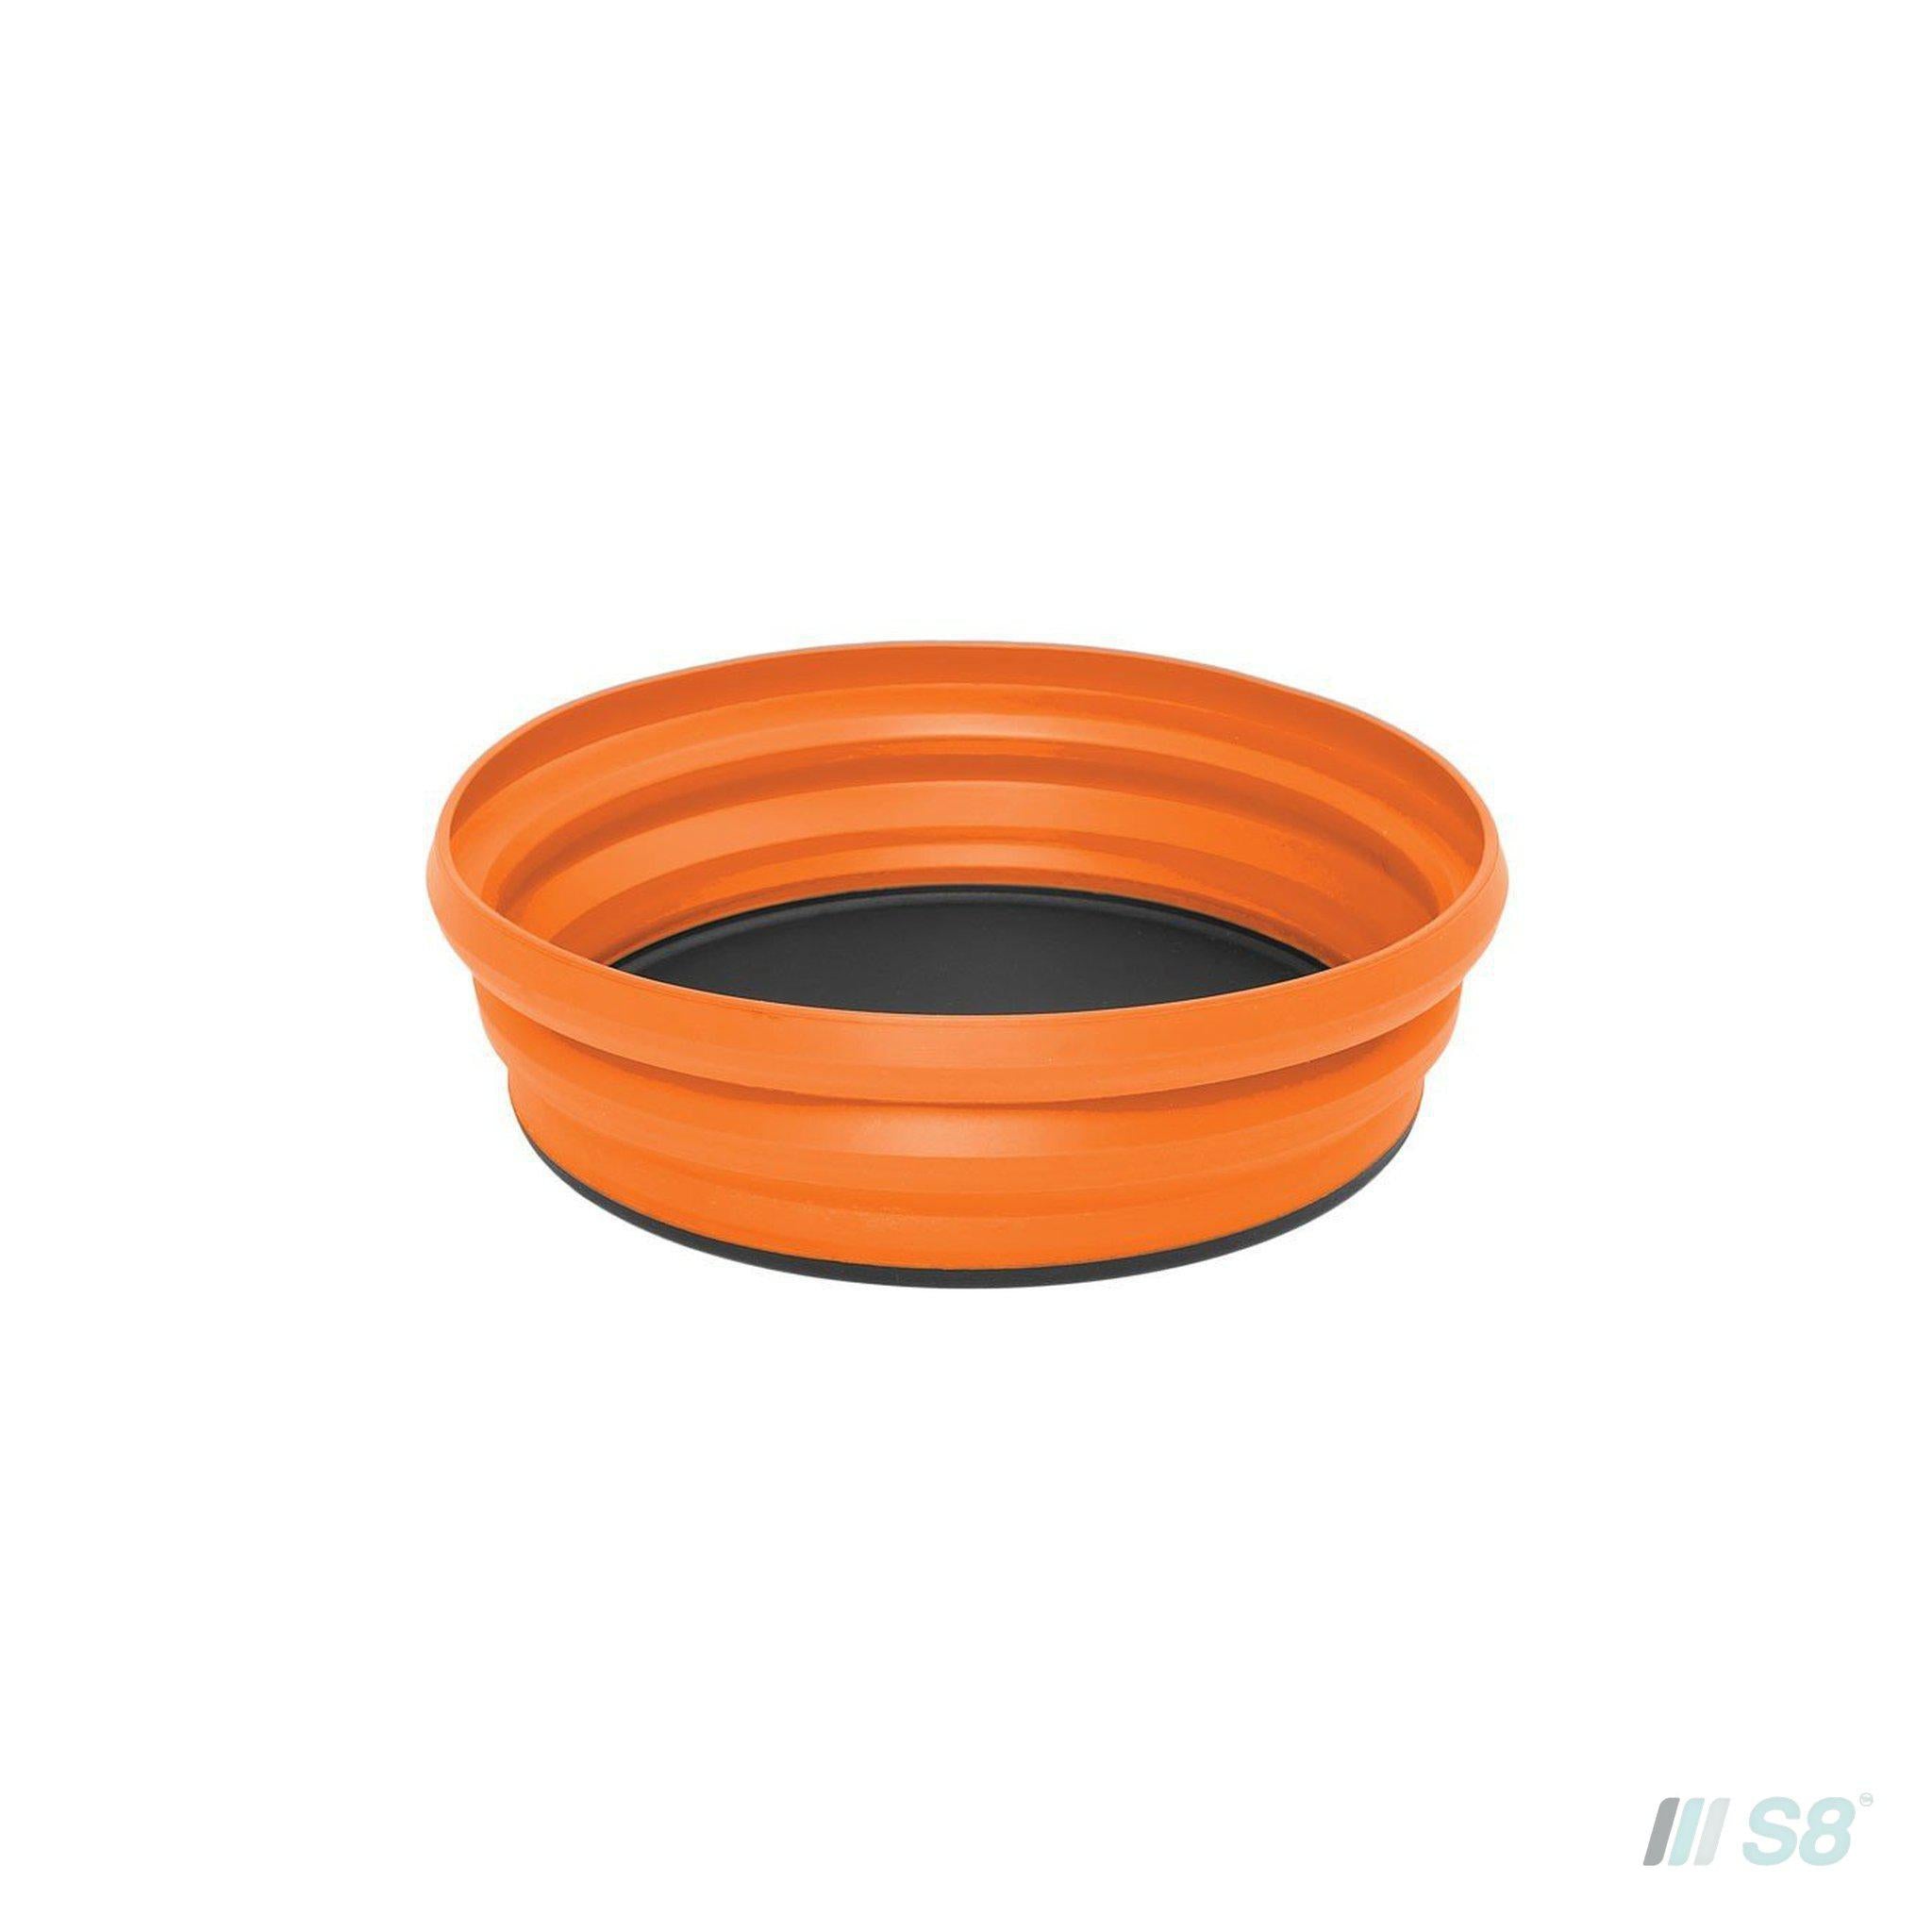 Sea To Summit XL-bowl-STS-S8 Products Group